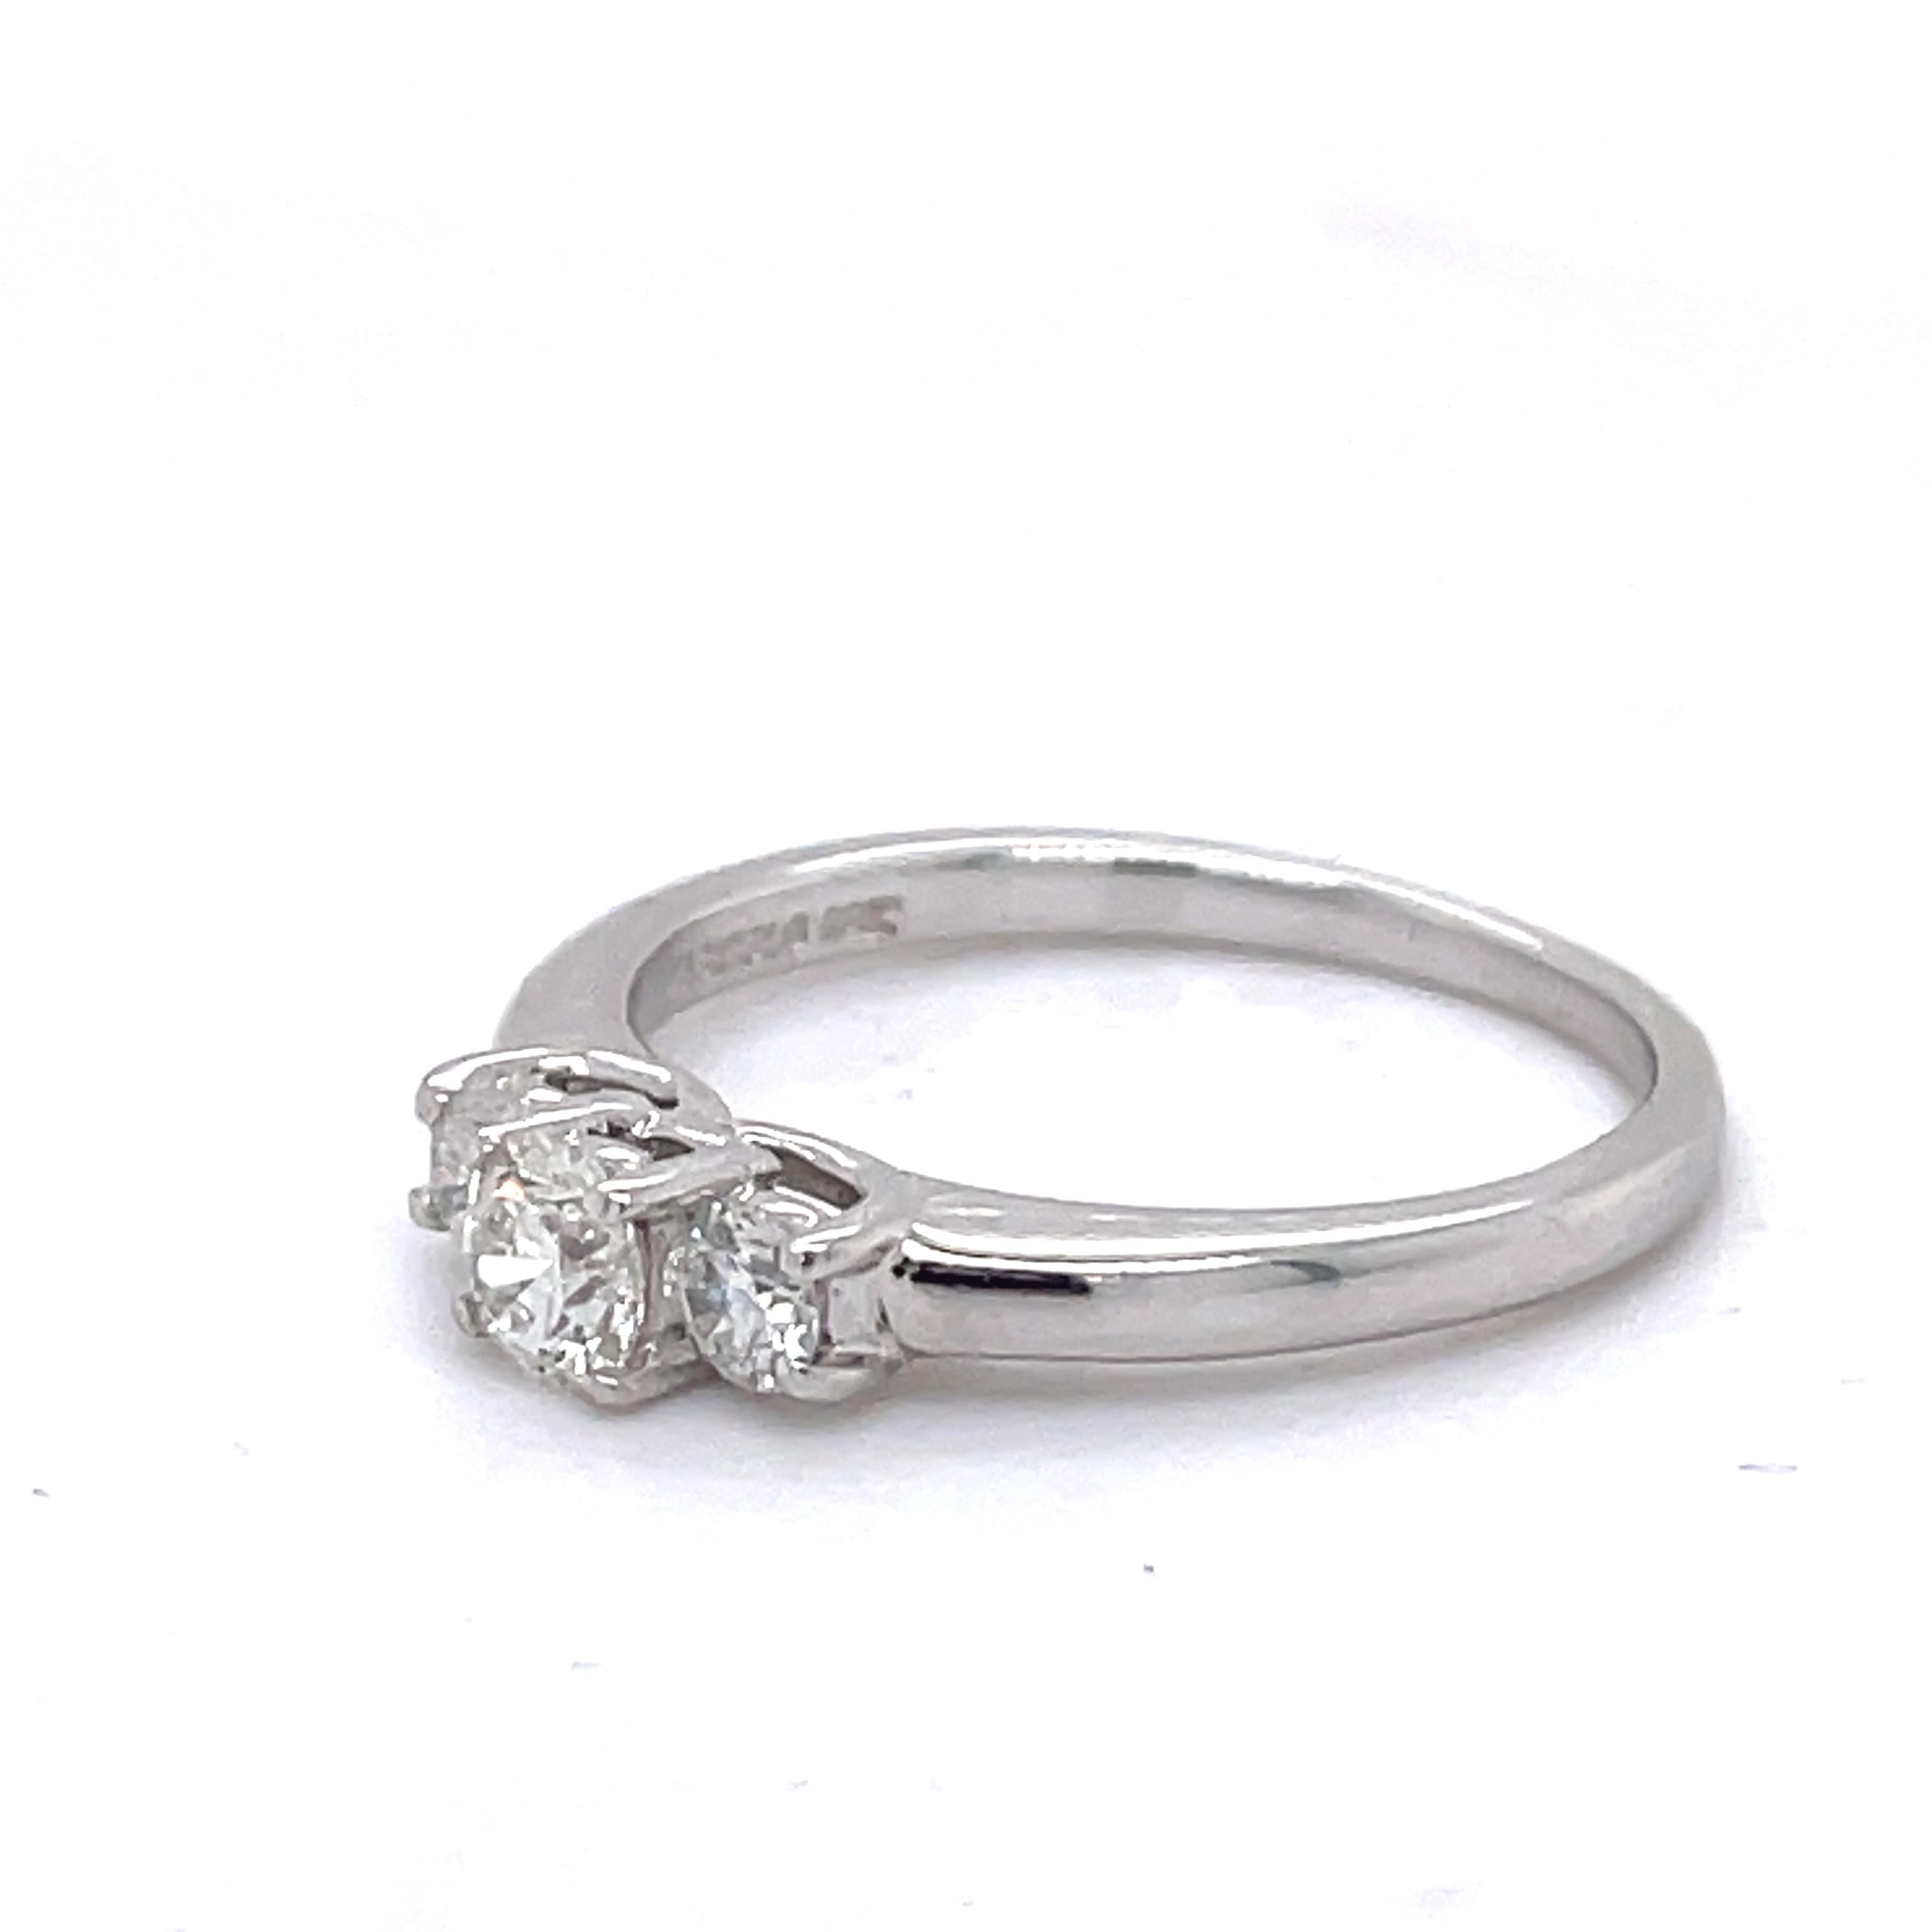 3 Stones engagement ring, 0.5ct diamonds ring, 14K white gold, Magicglo Jewelry In Excellent Condition For Sale In Ramat Gan, IL